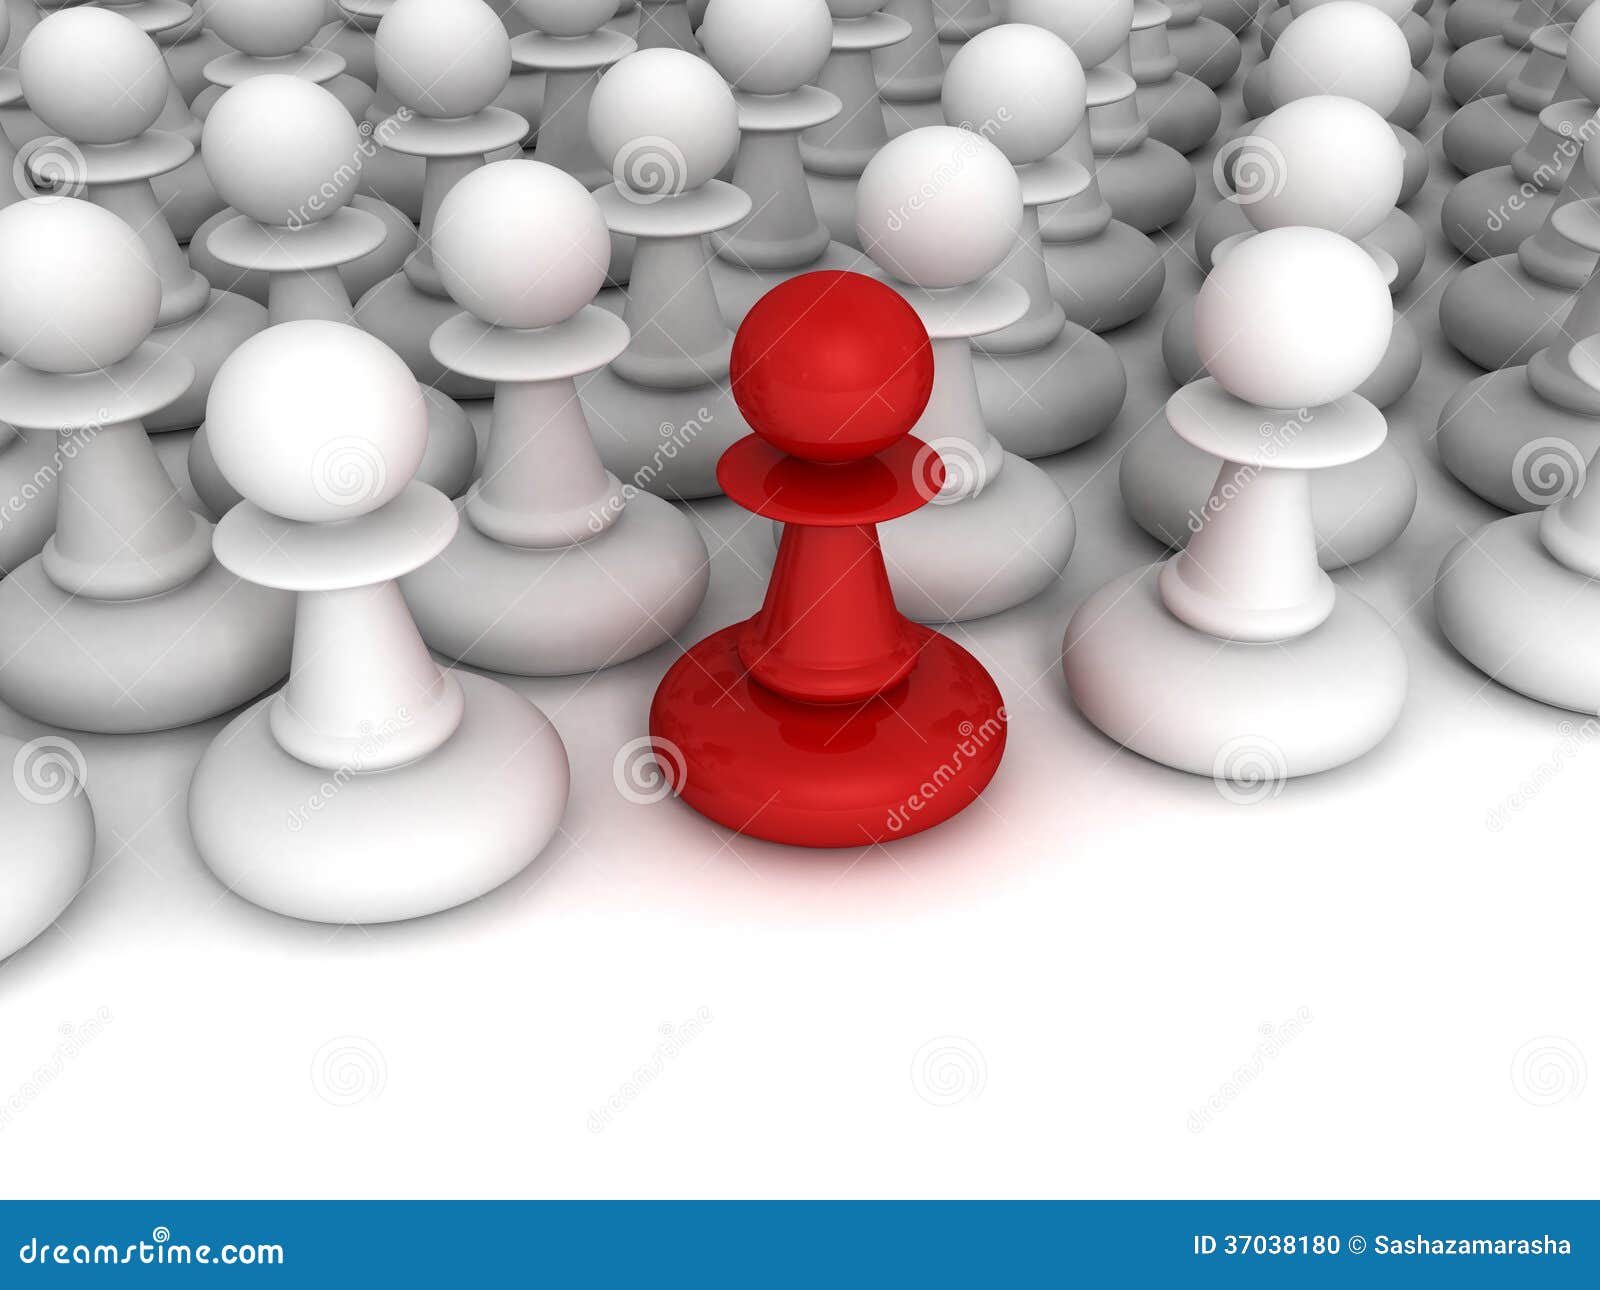 Red Different Pawn Out from White Crowd Stock Illustration ...